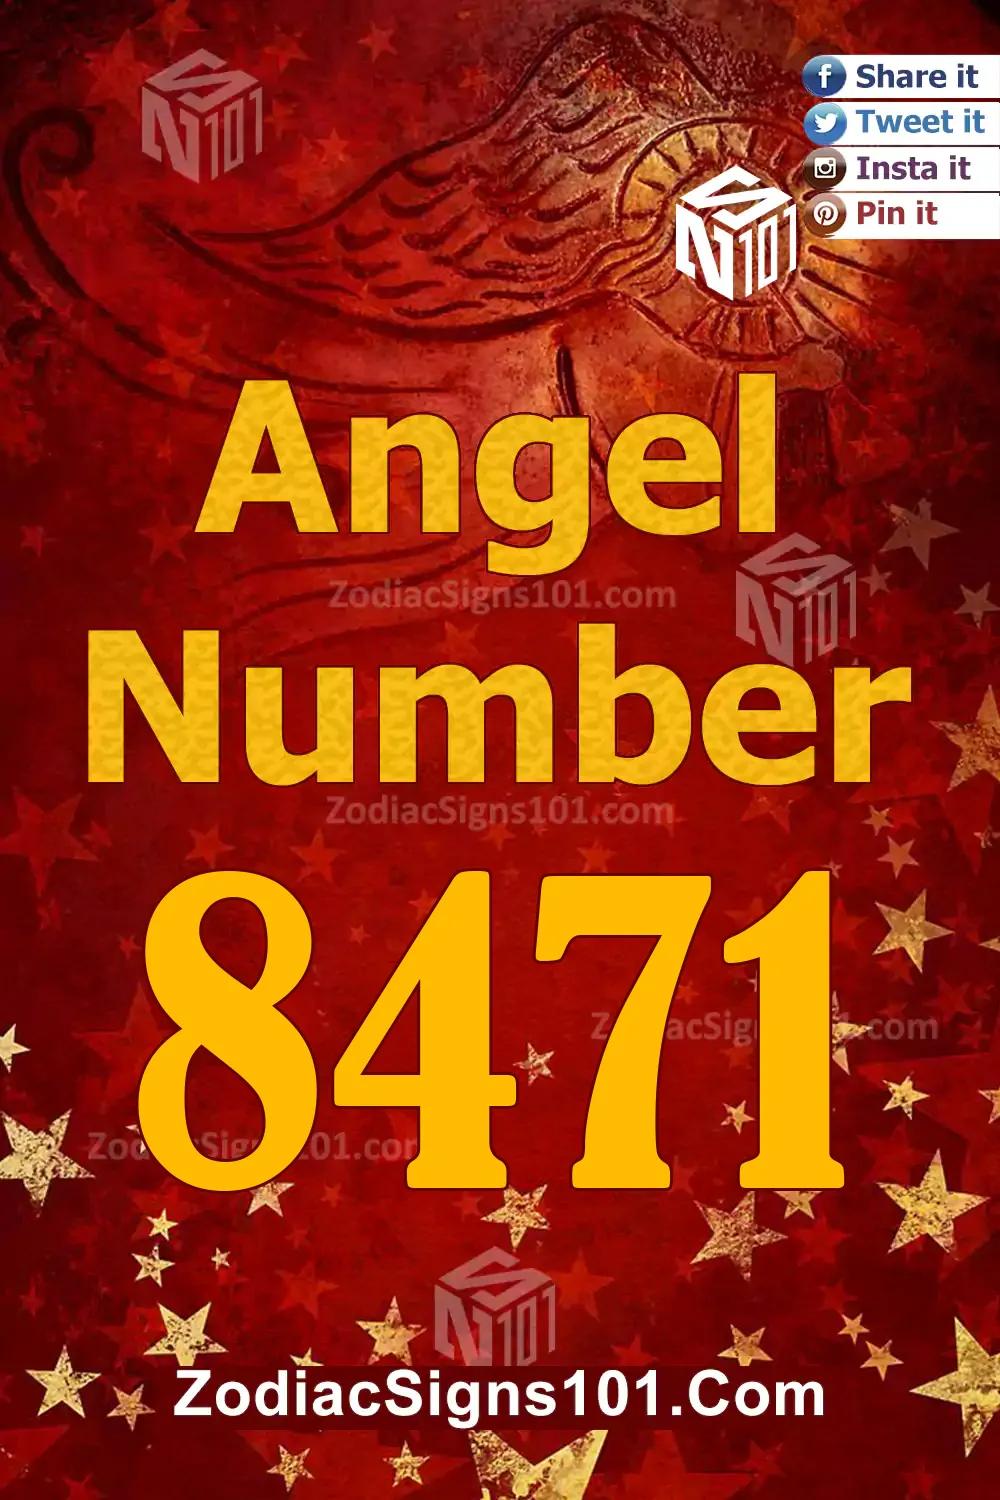 8471 Angel Number Meaning